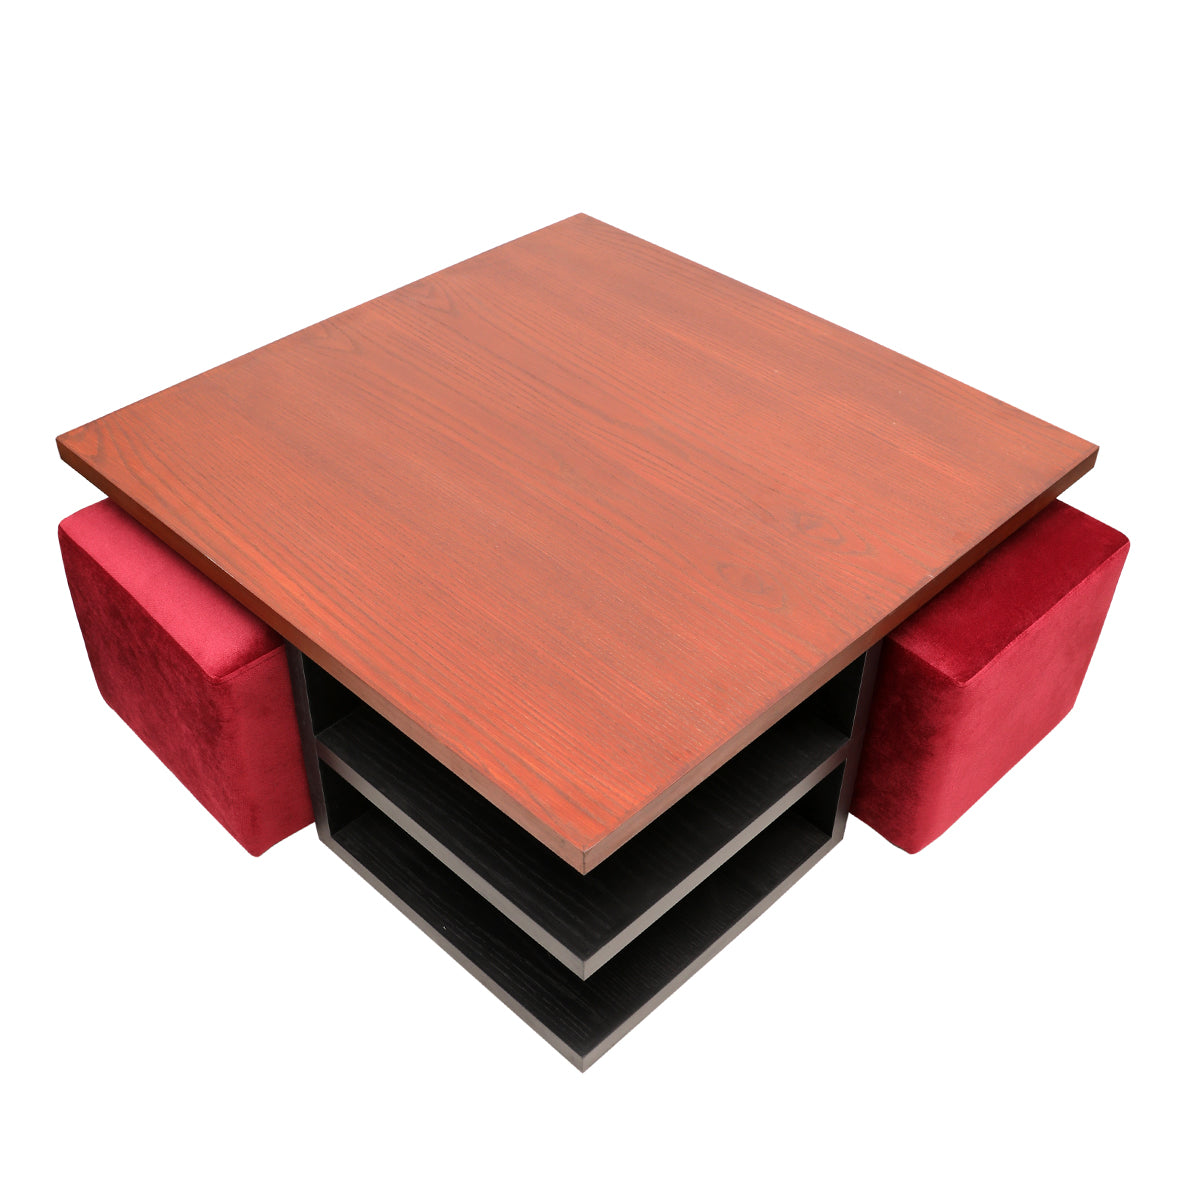 Bernard Center Table (Wooden Top) with two Poufs